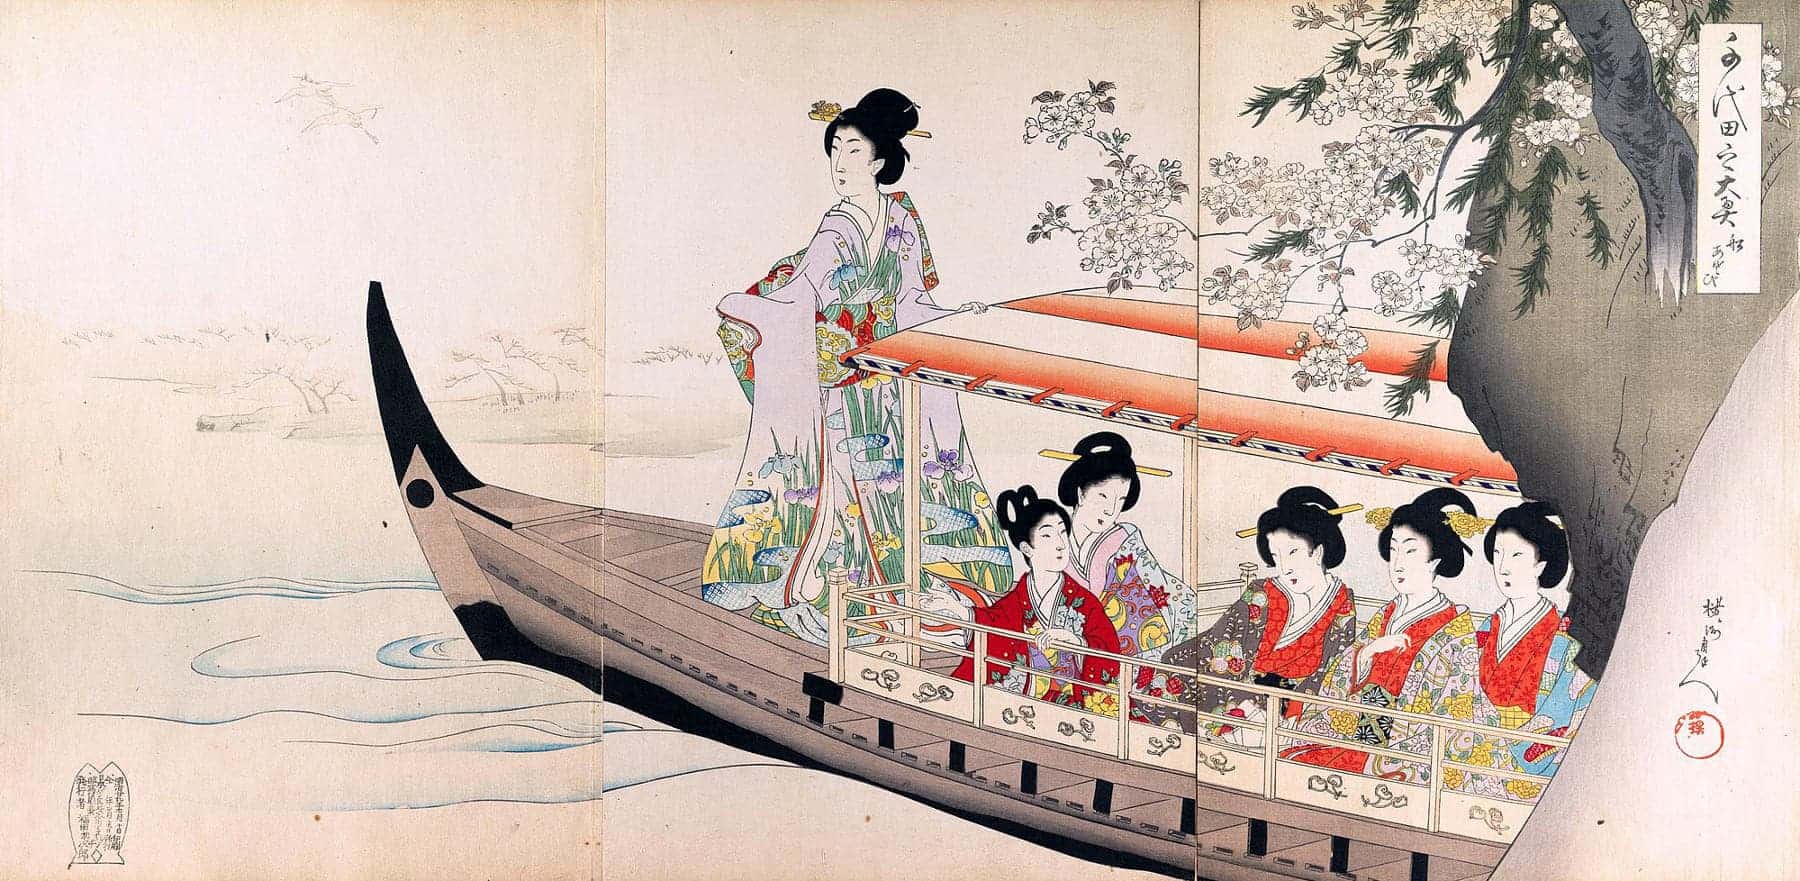 Life in the Women’s Palace as imagined by the artist Hashimoto Chikanobu